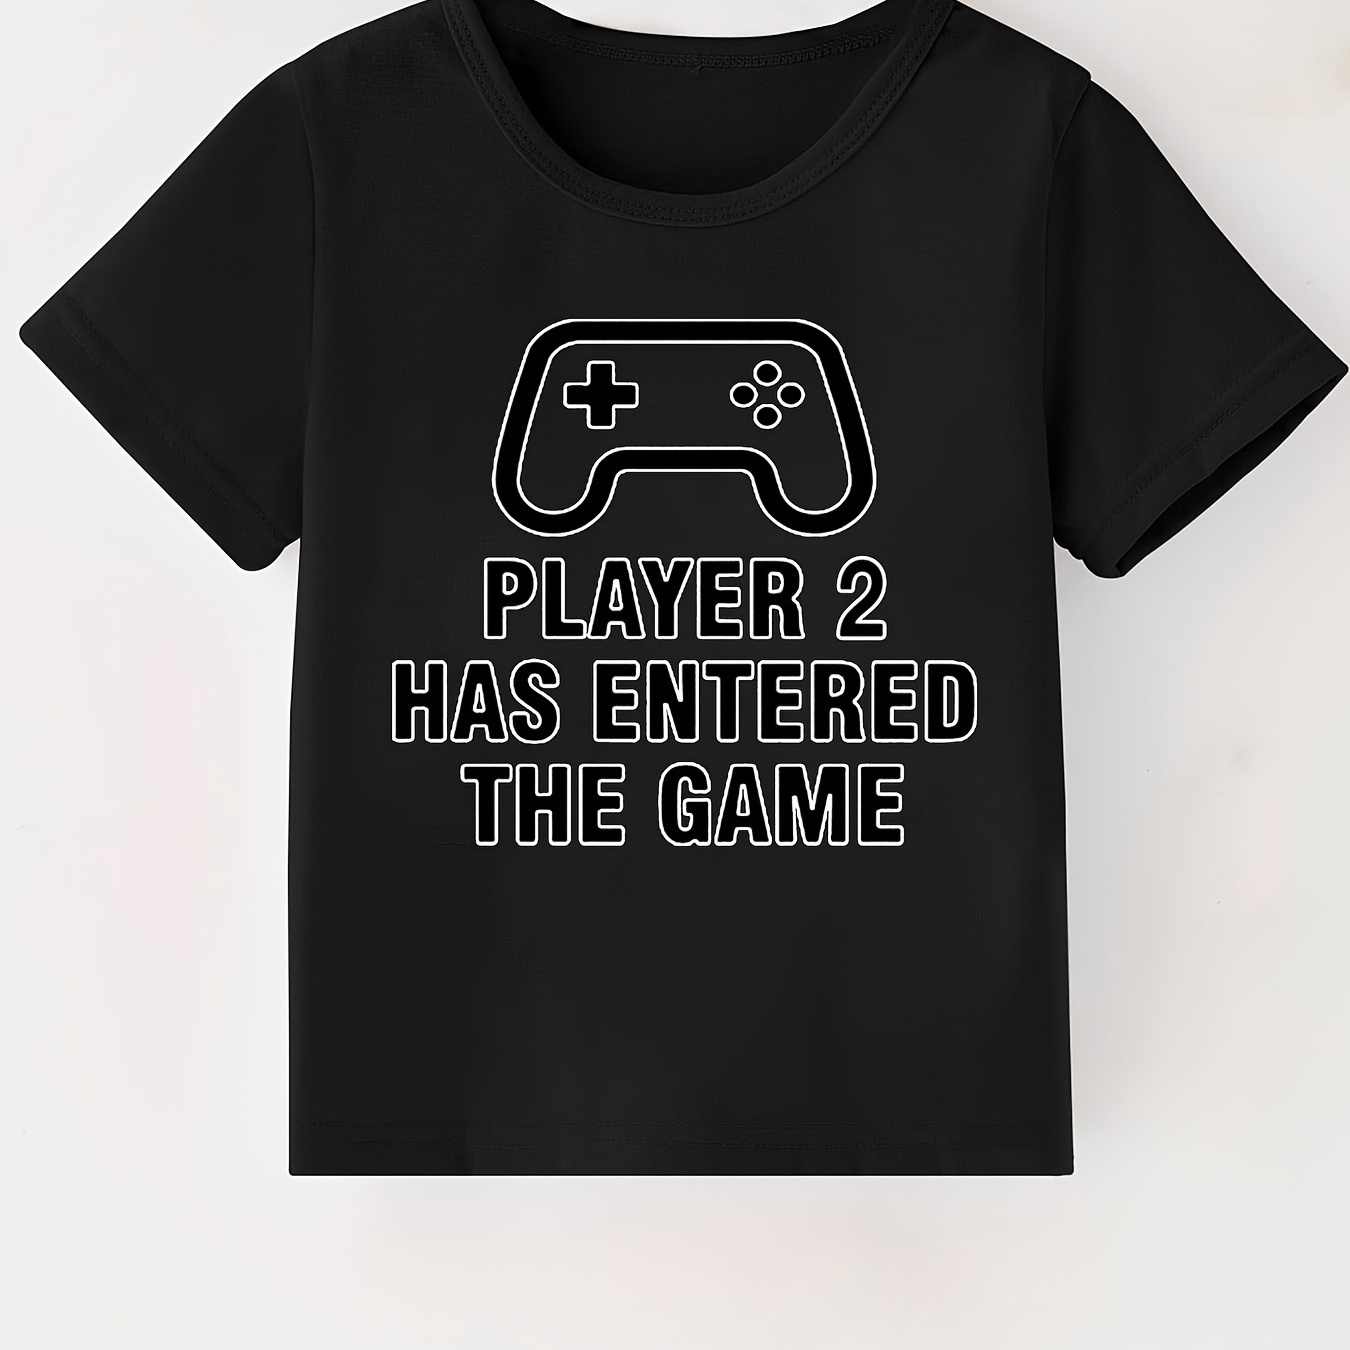 

Player 2 Has Entered The Game Letter Print Boys Creative T-shirt, Casual Lightweight Comfy Short Sleeve Tee Tops, Kids Clothings For Summer